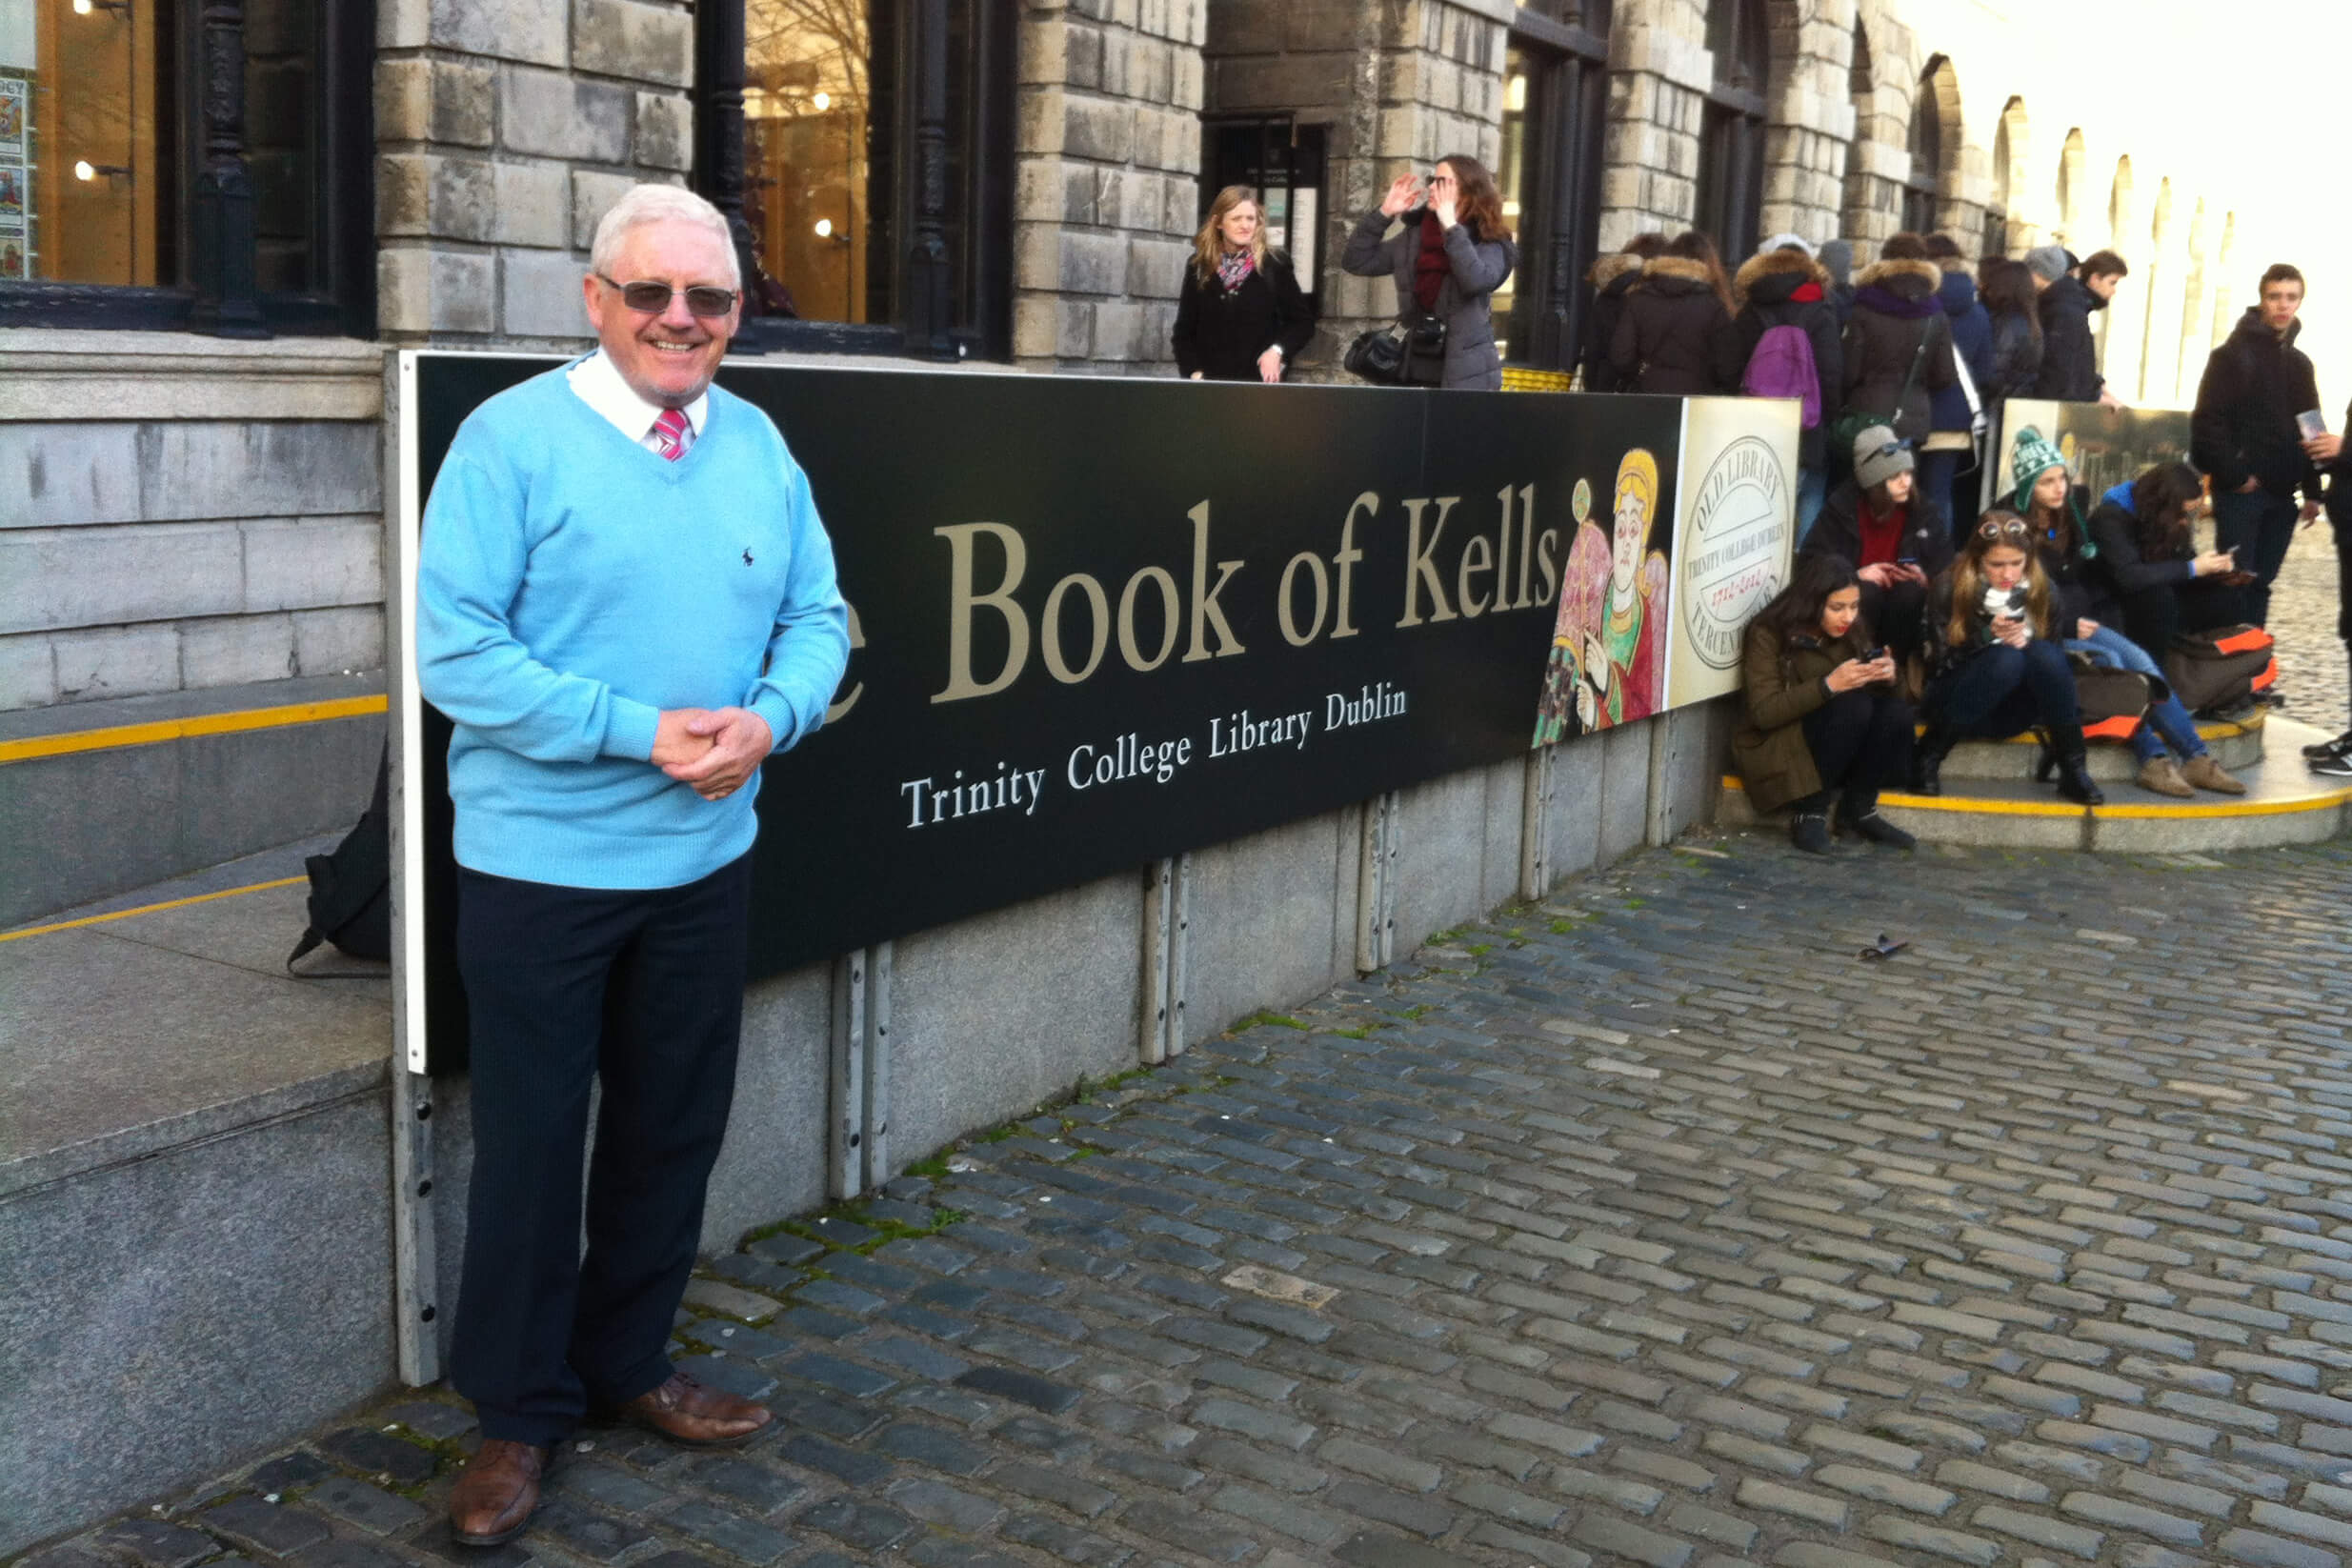 Outside the Book of Kells at Trinity College